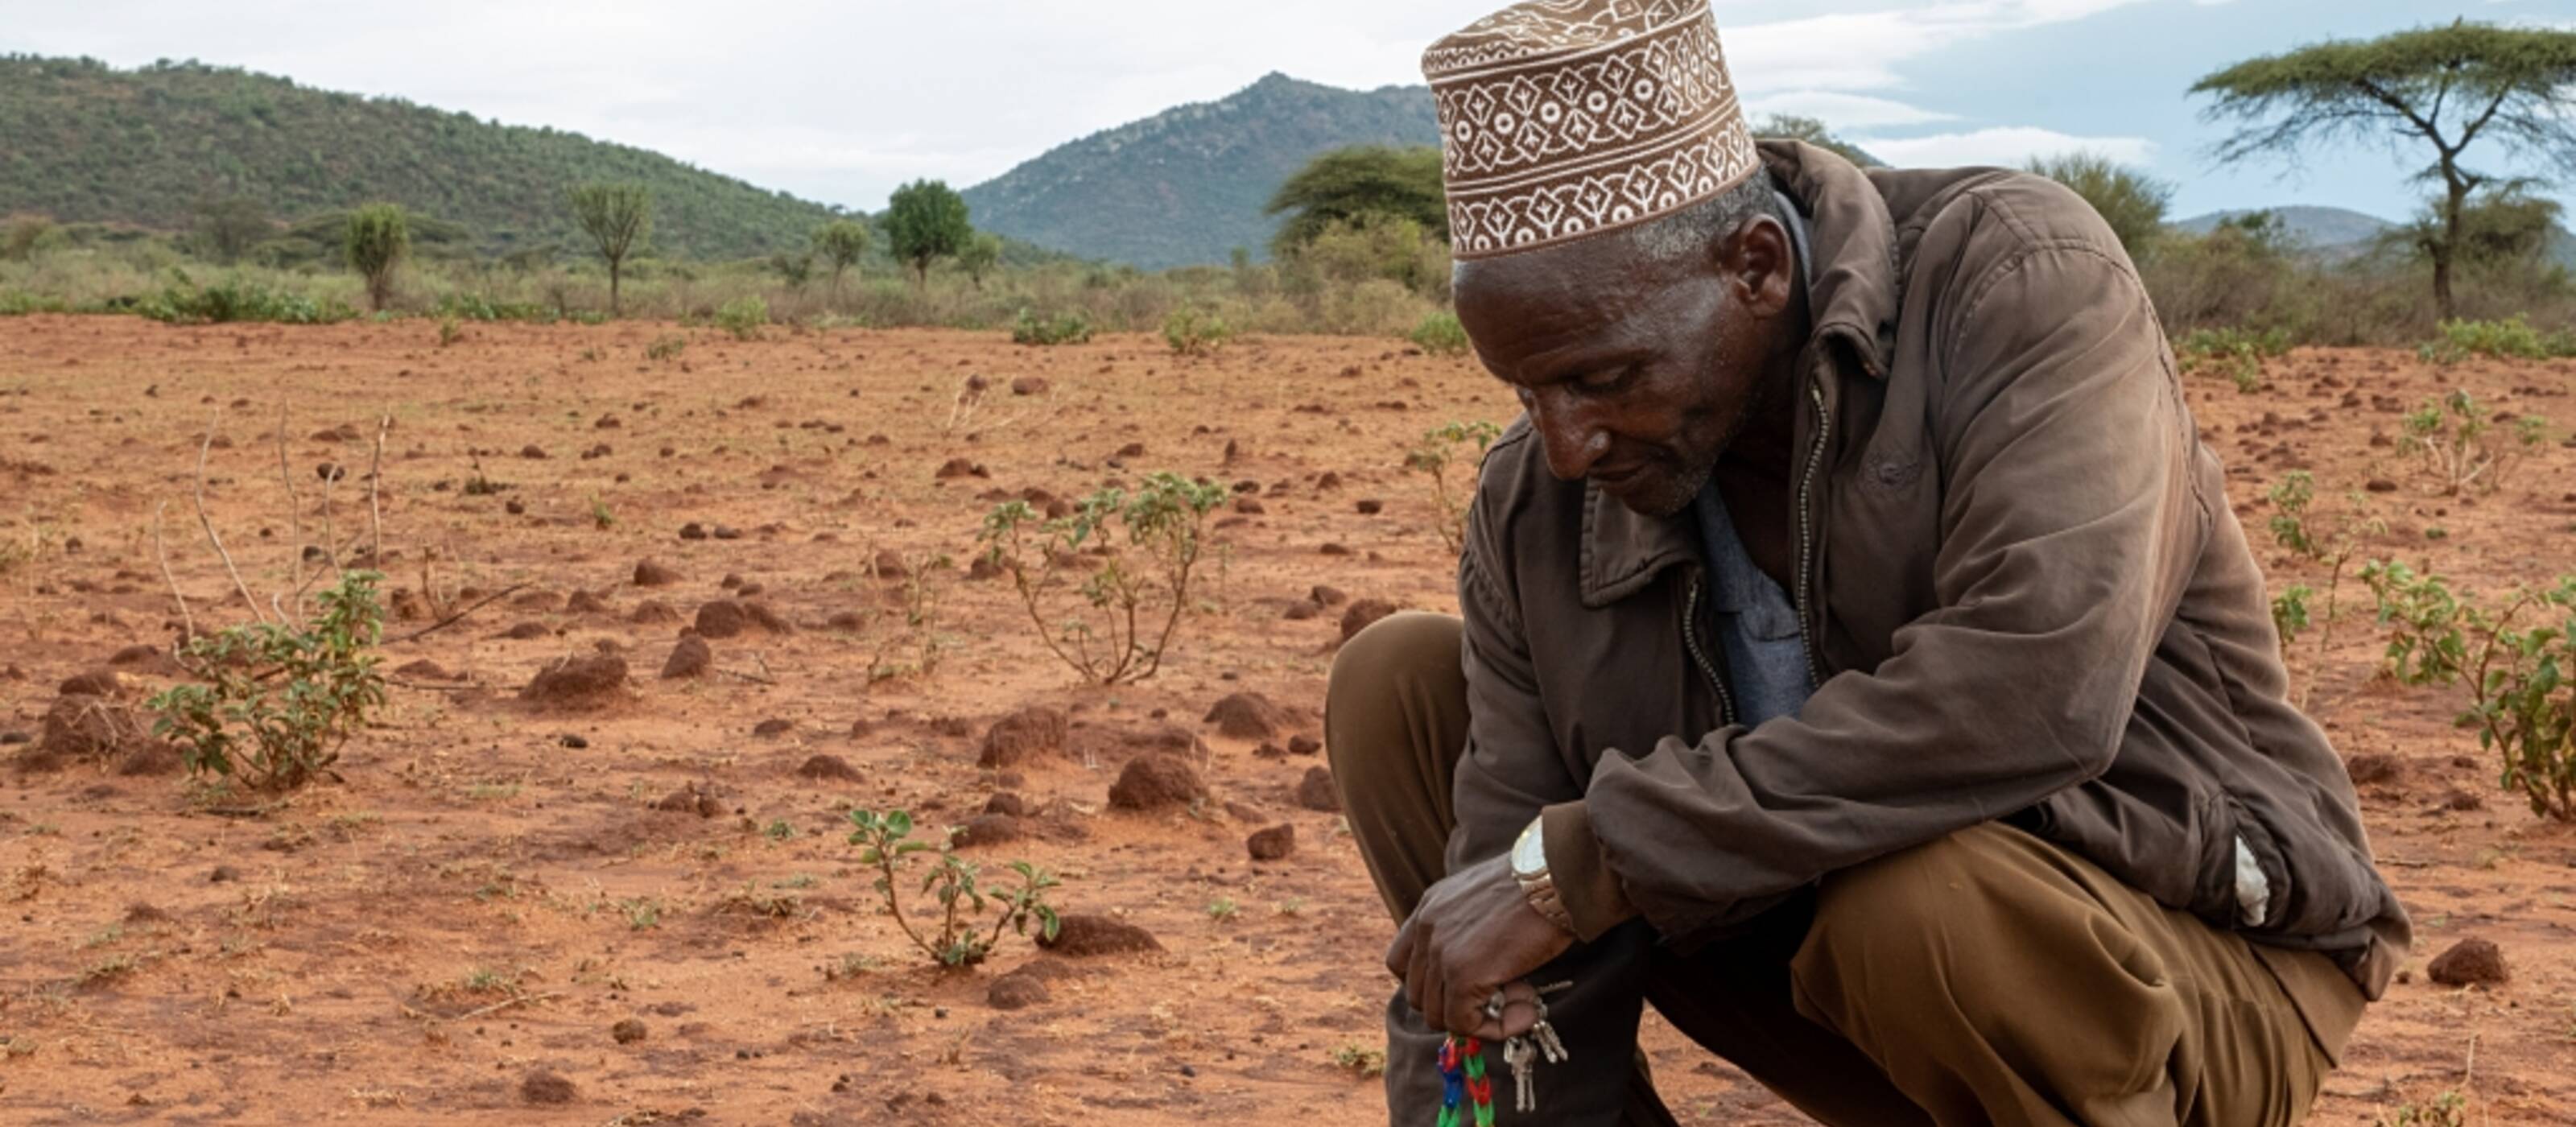 Ethiopia, one of the «forgotten crises»: The man is a father of nine, a widower, and has lost all his cows and goats in a drought.